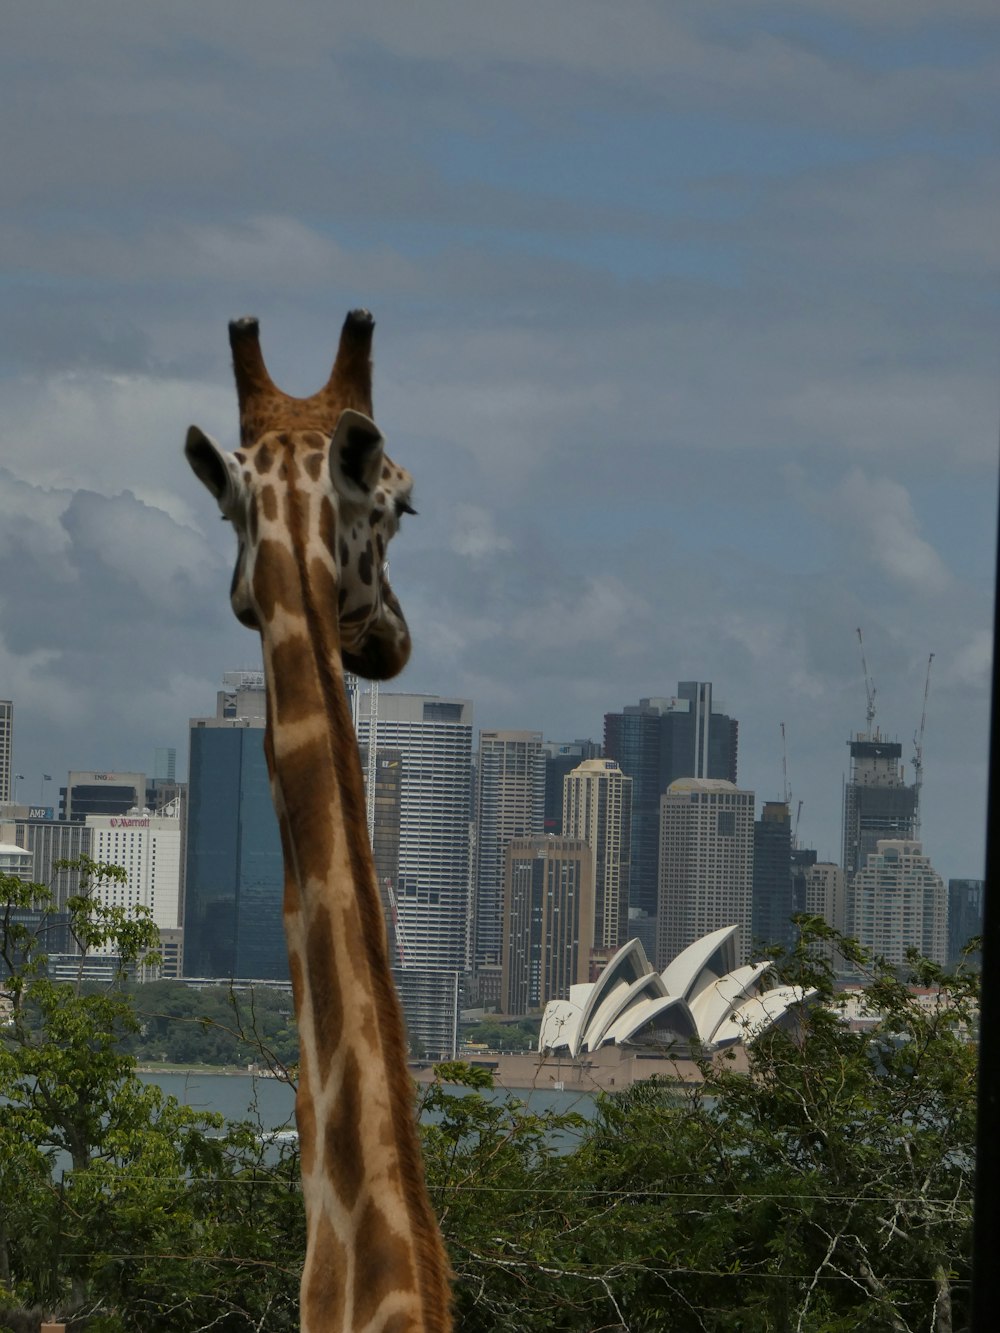 a giraffe standing in front of a city skyline